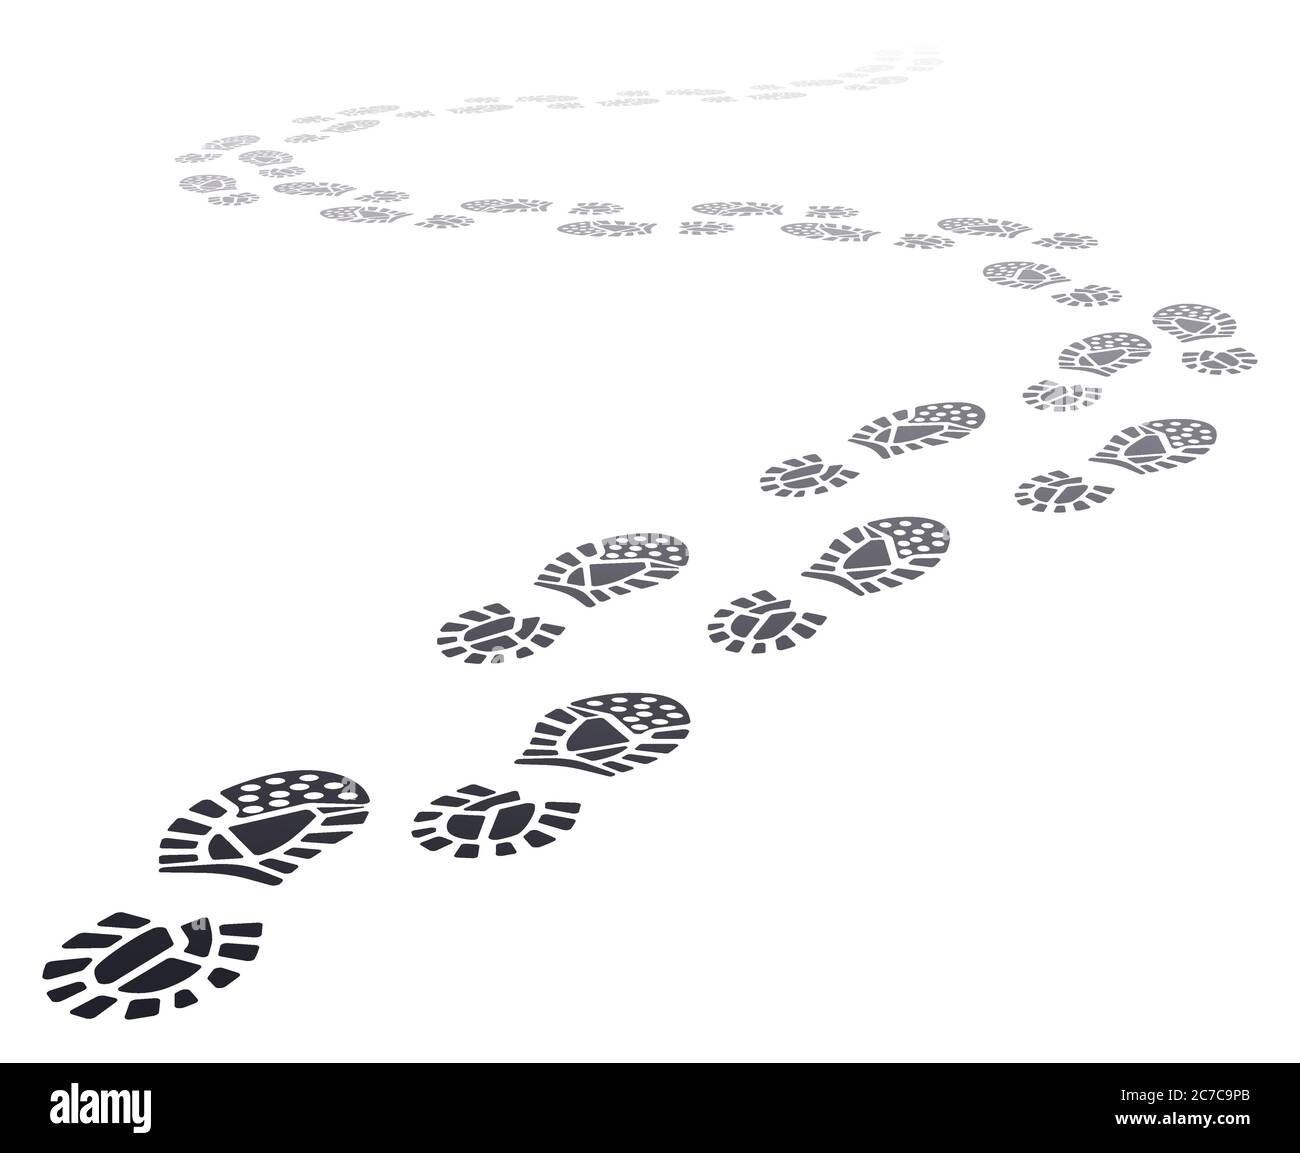 Walking far footprints. Outgoing footsteps perspective trail, walk away human foot steps silhouette, shoe steps track vector illustration Stock Vector